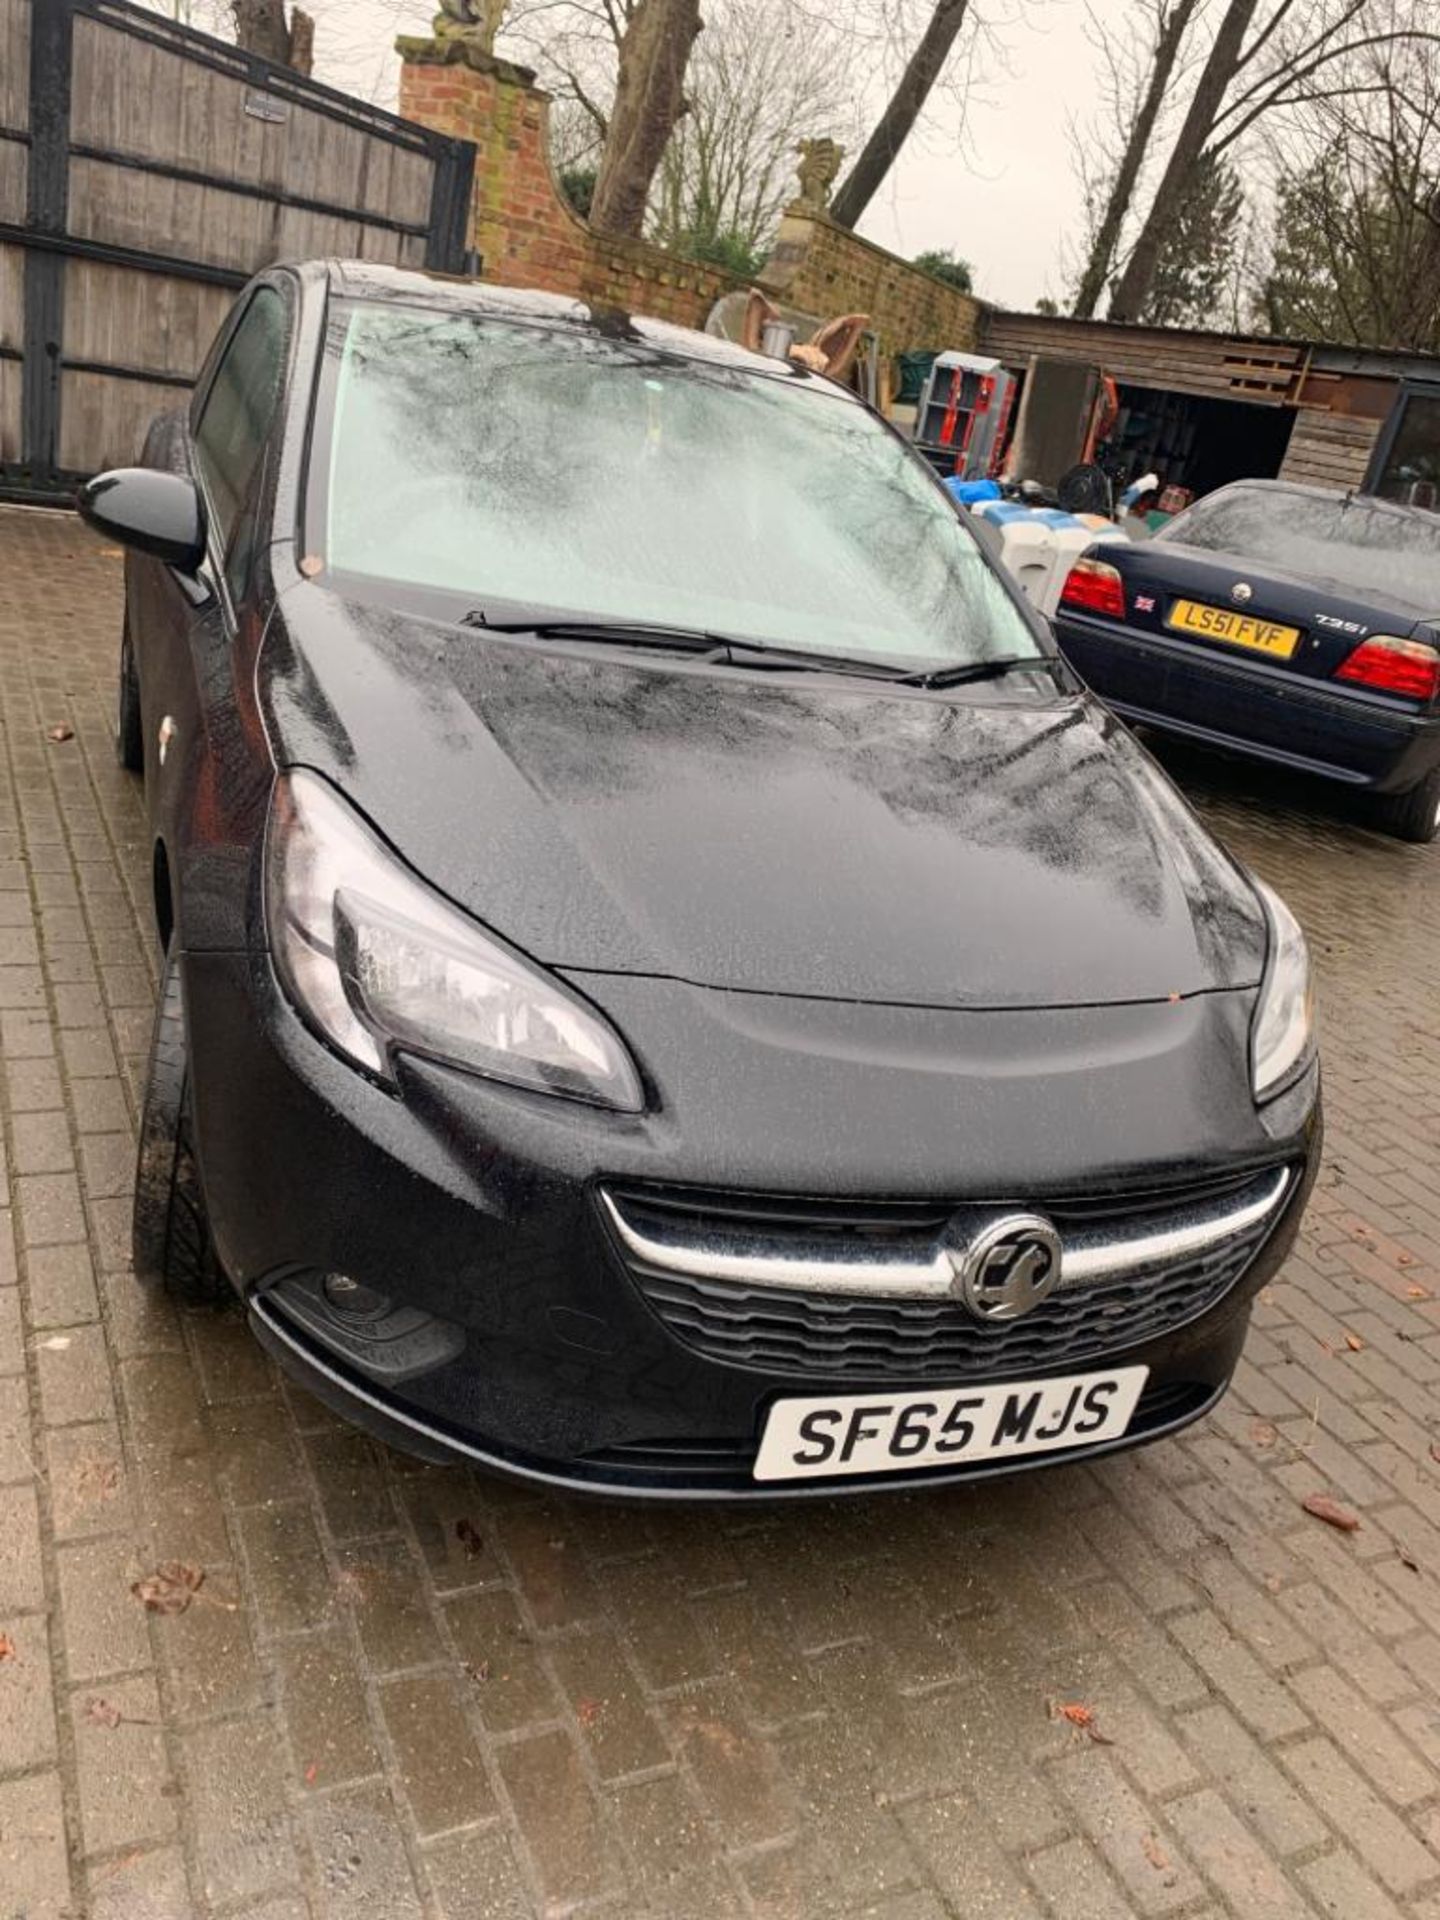 2016/65 REG VAUXHALL CORSA LIMITED EDITION 1.4 PETROL 3 DOOR HATCHBACK, SHOWING 2 FORMER KEEPERS - Image 2 of 16